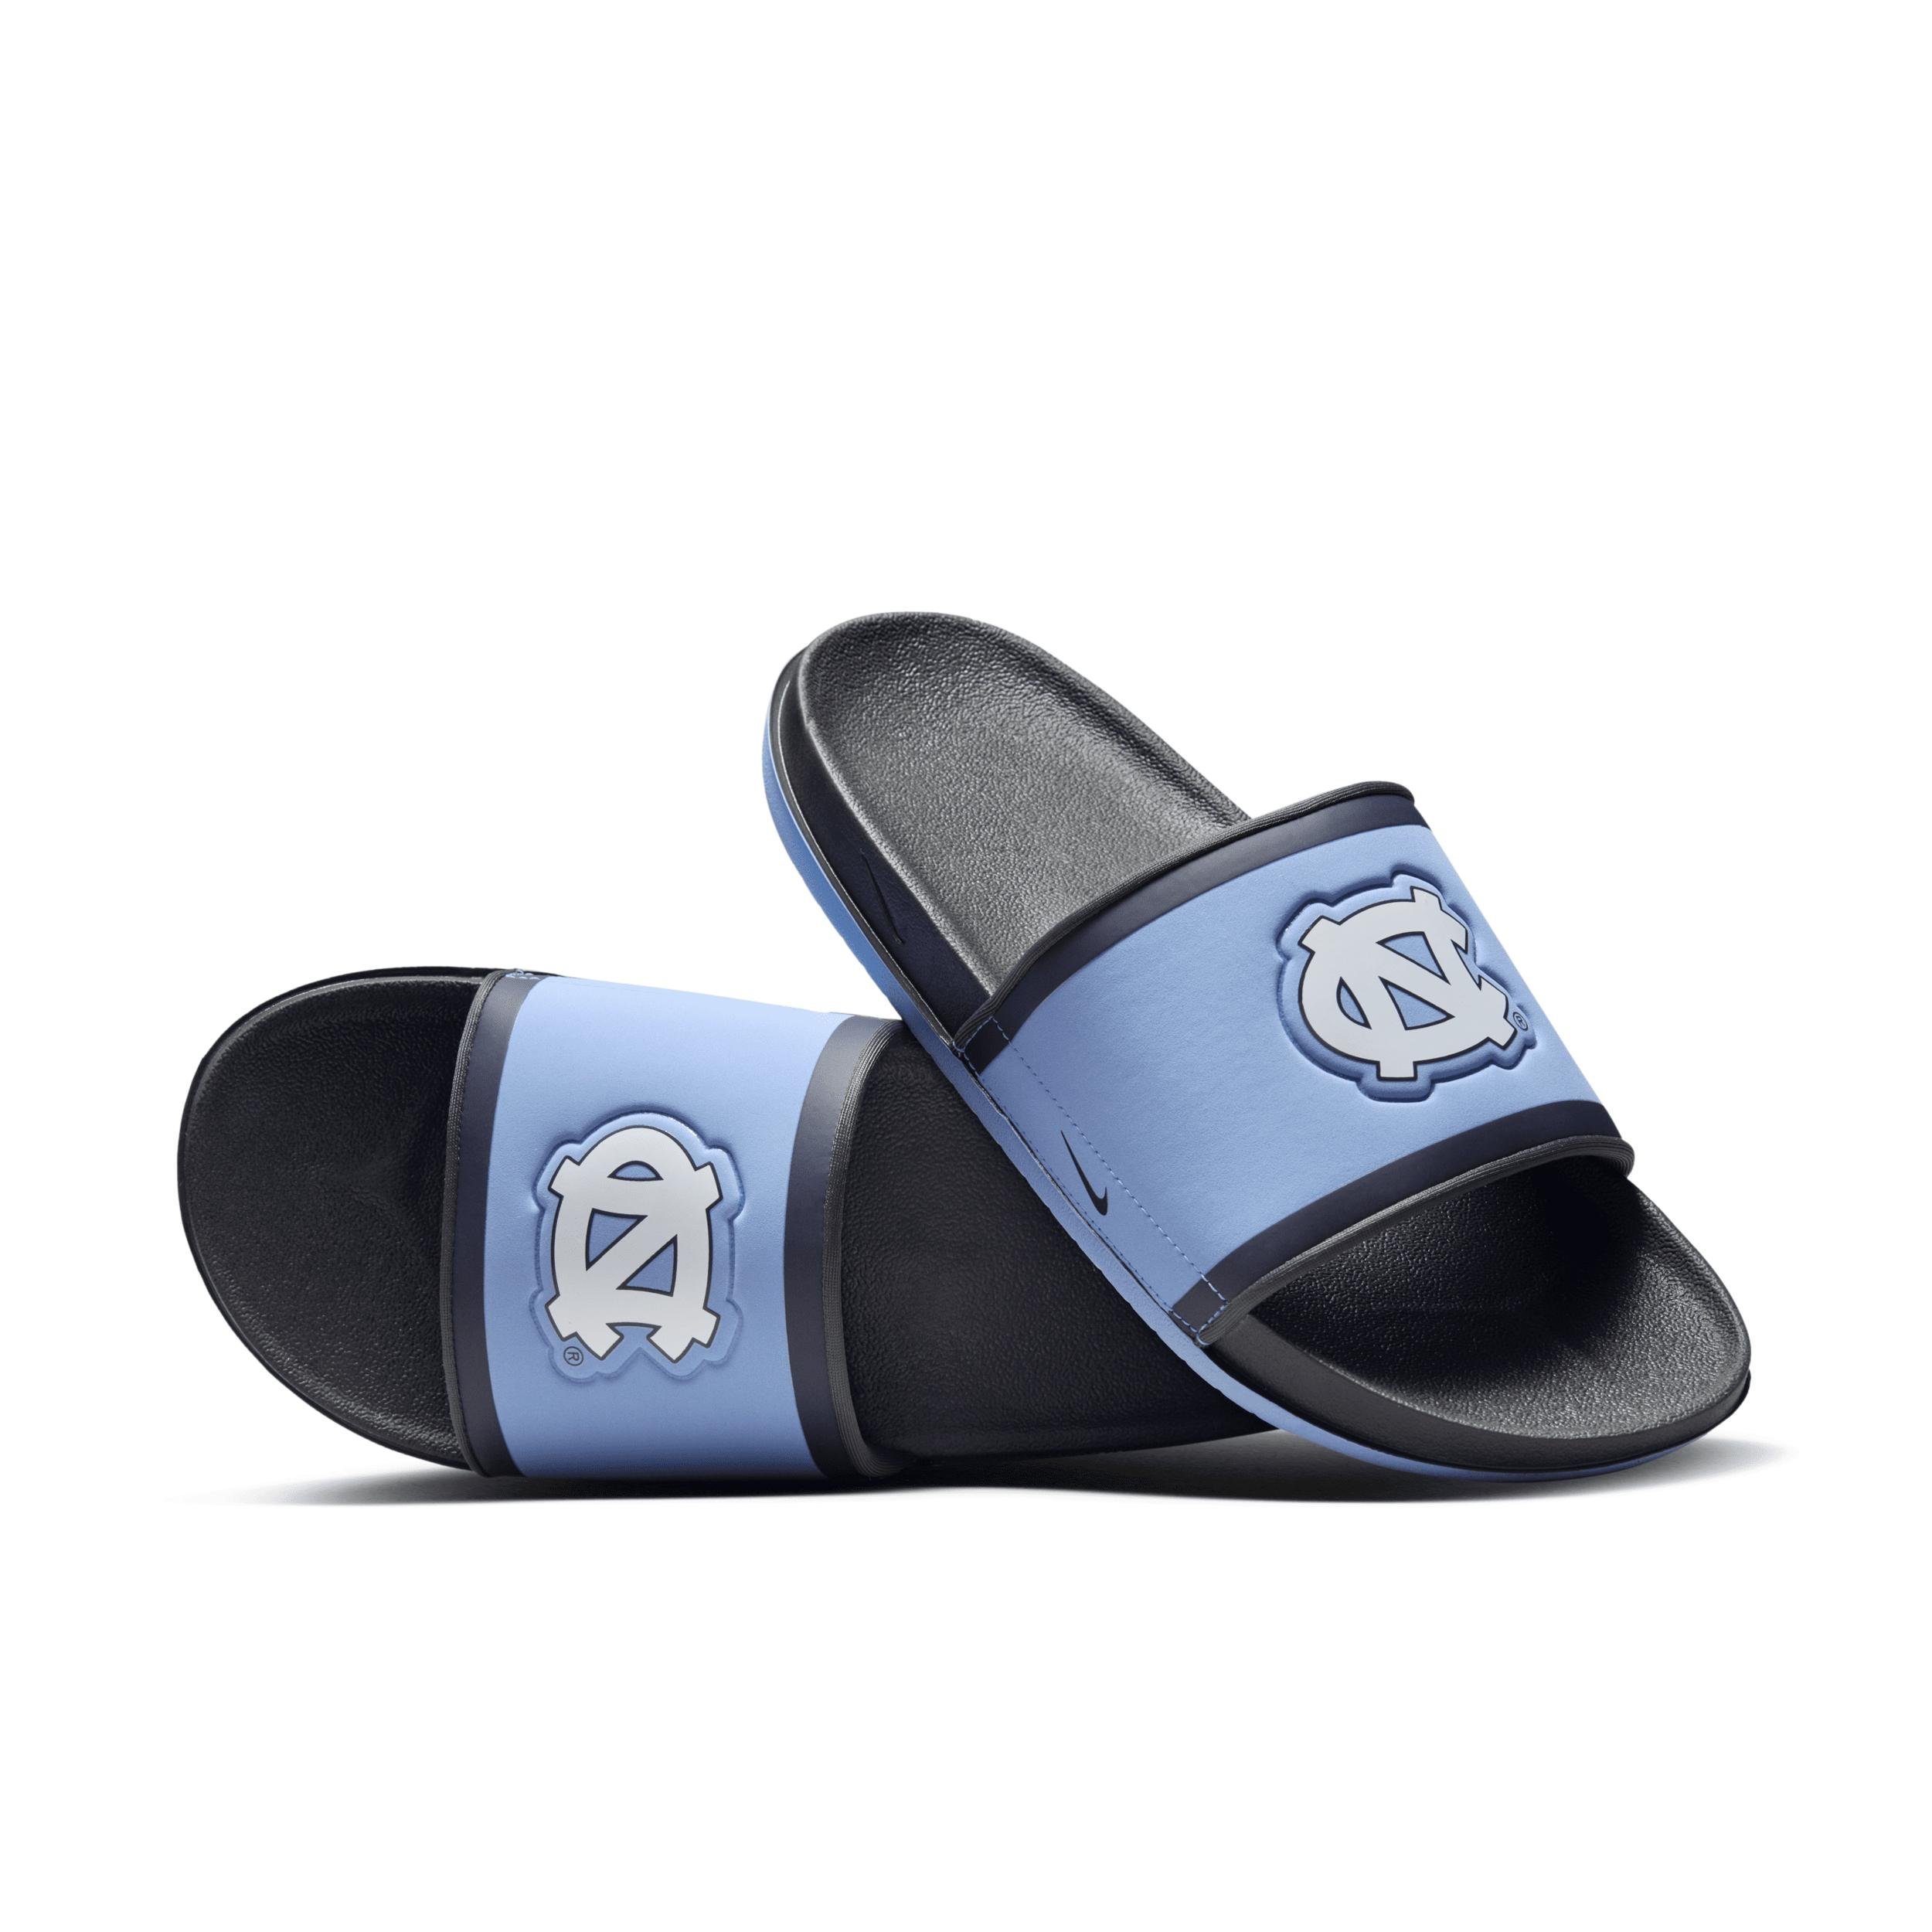 Nike Men's College Offcourt (UNC) Slides by NIKE